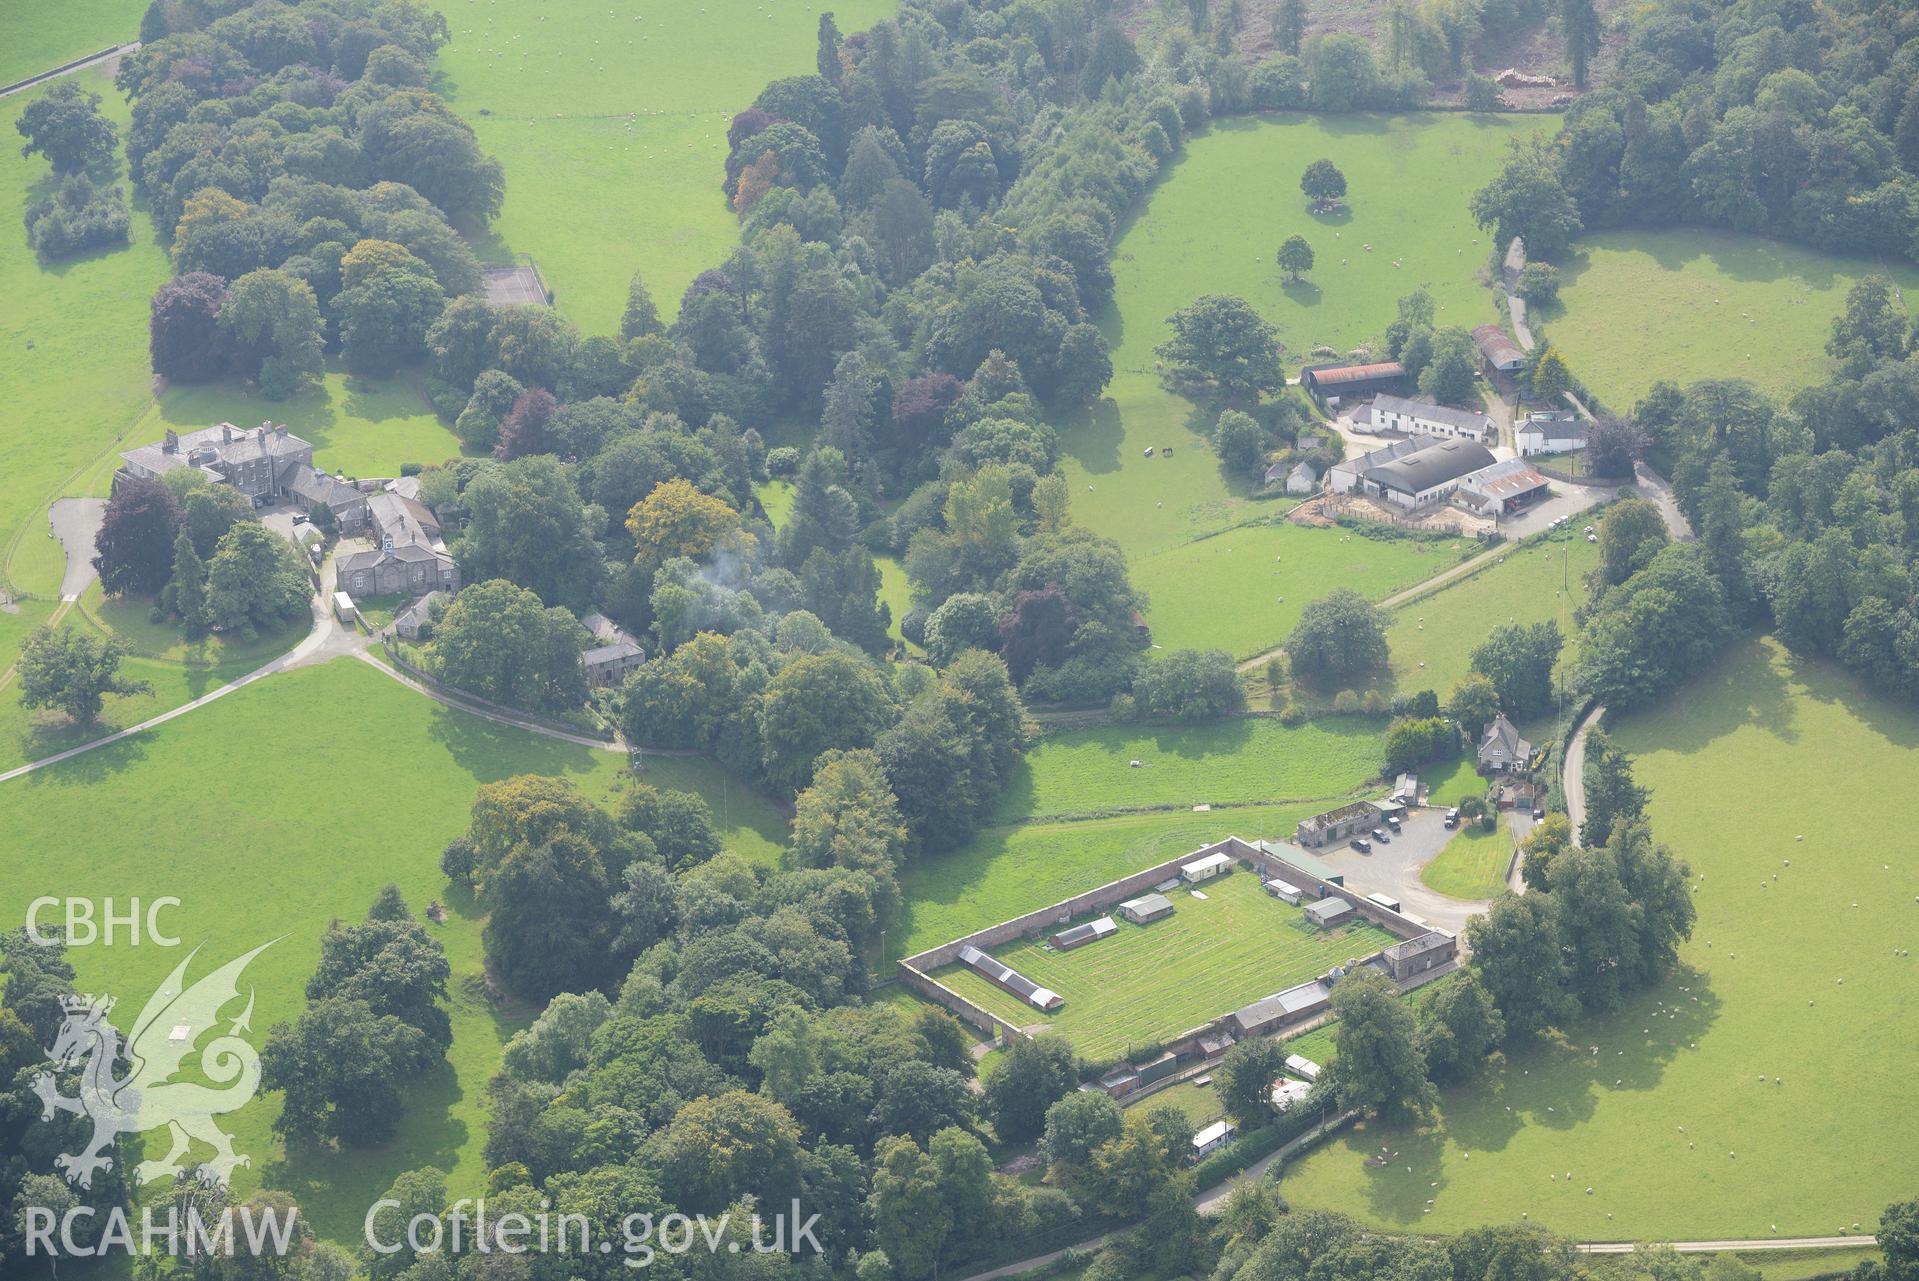 Coed Coch house, garden, and outbuildings, Dolwen, near Abergele. Oblique aerial photograph taken during the Royal Commission's programme of archaeological aerial reconnaissance by Toby Driver on 11th September 2015.